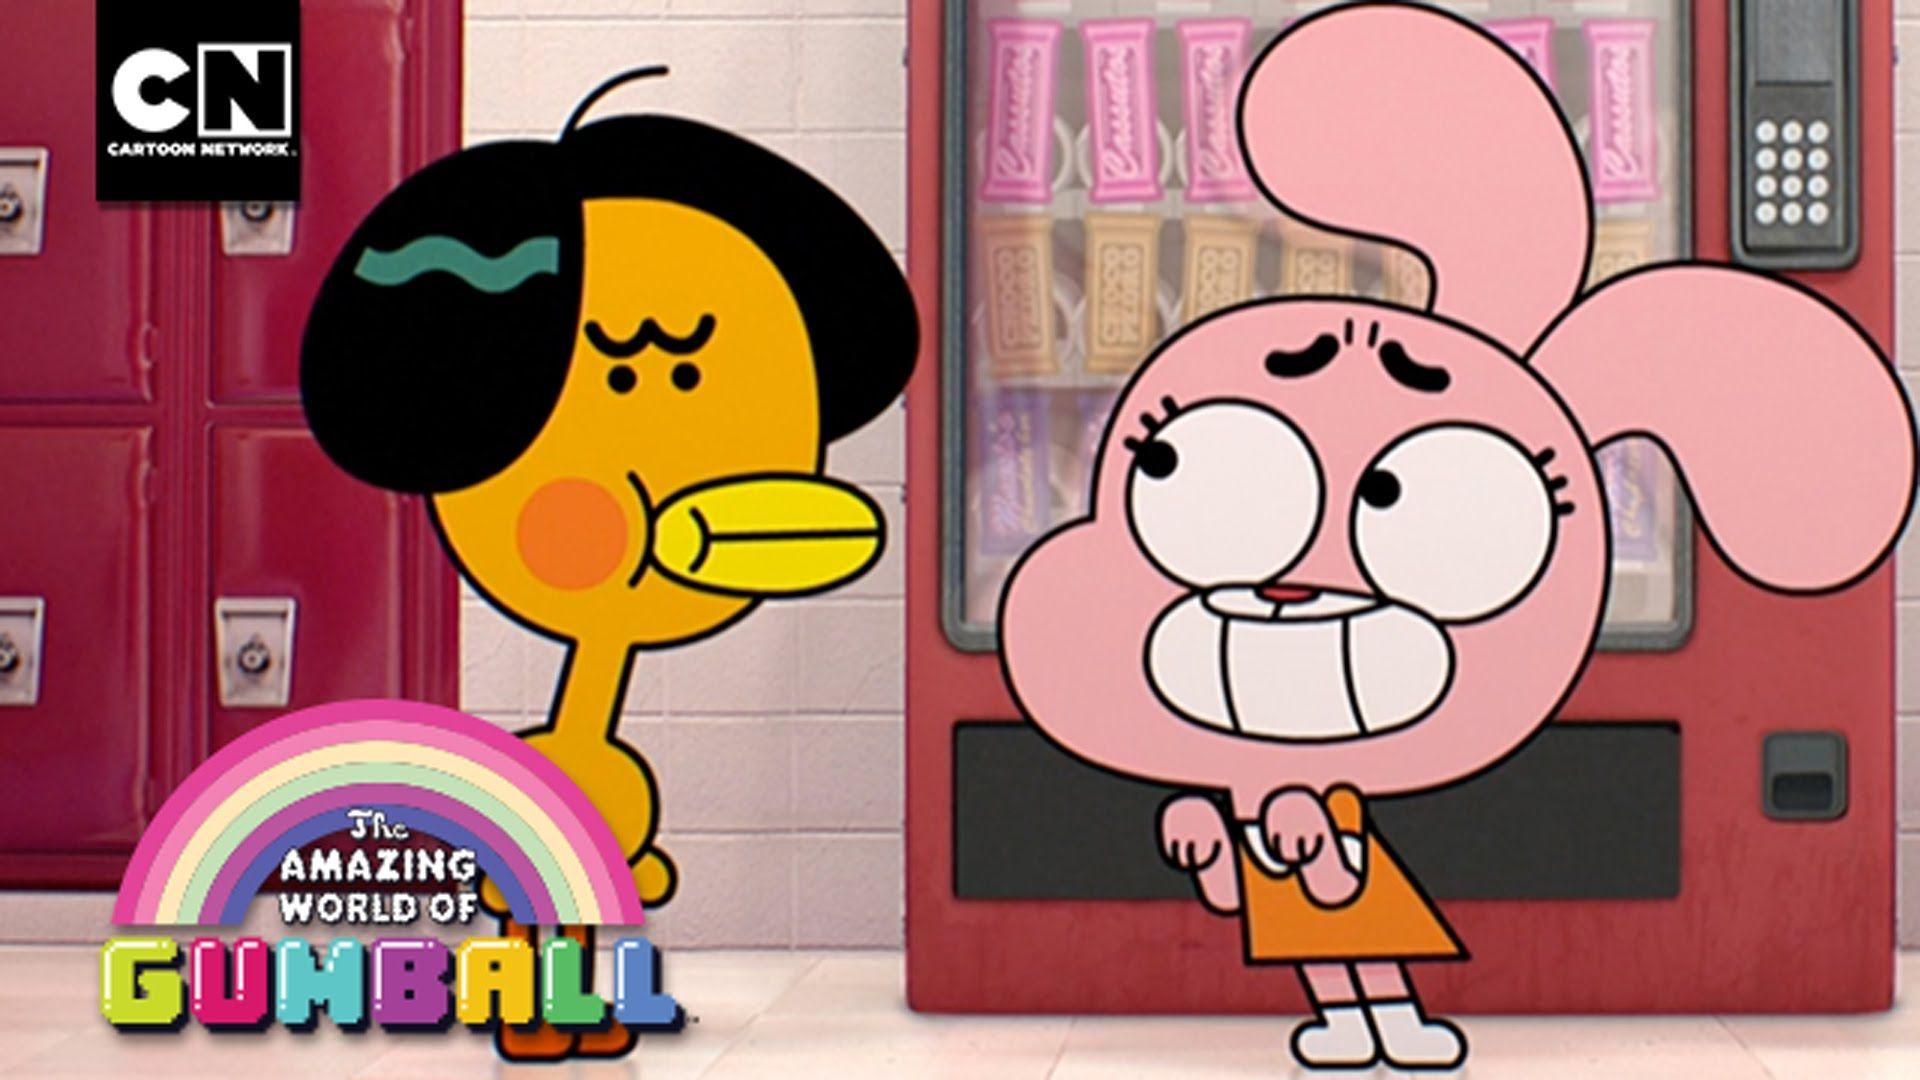 Anais Makes a Friend. The Amazing World of Gumball. Cartoon